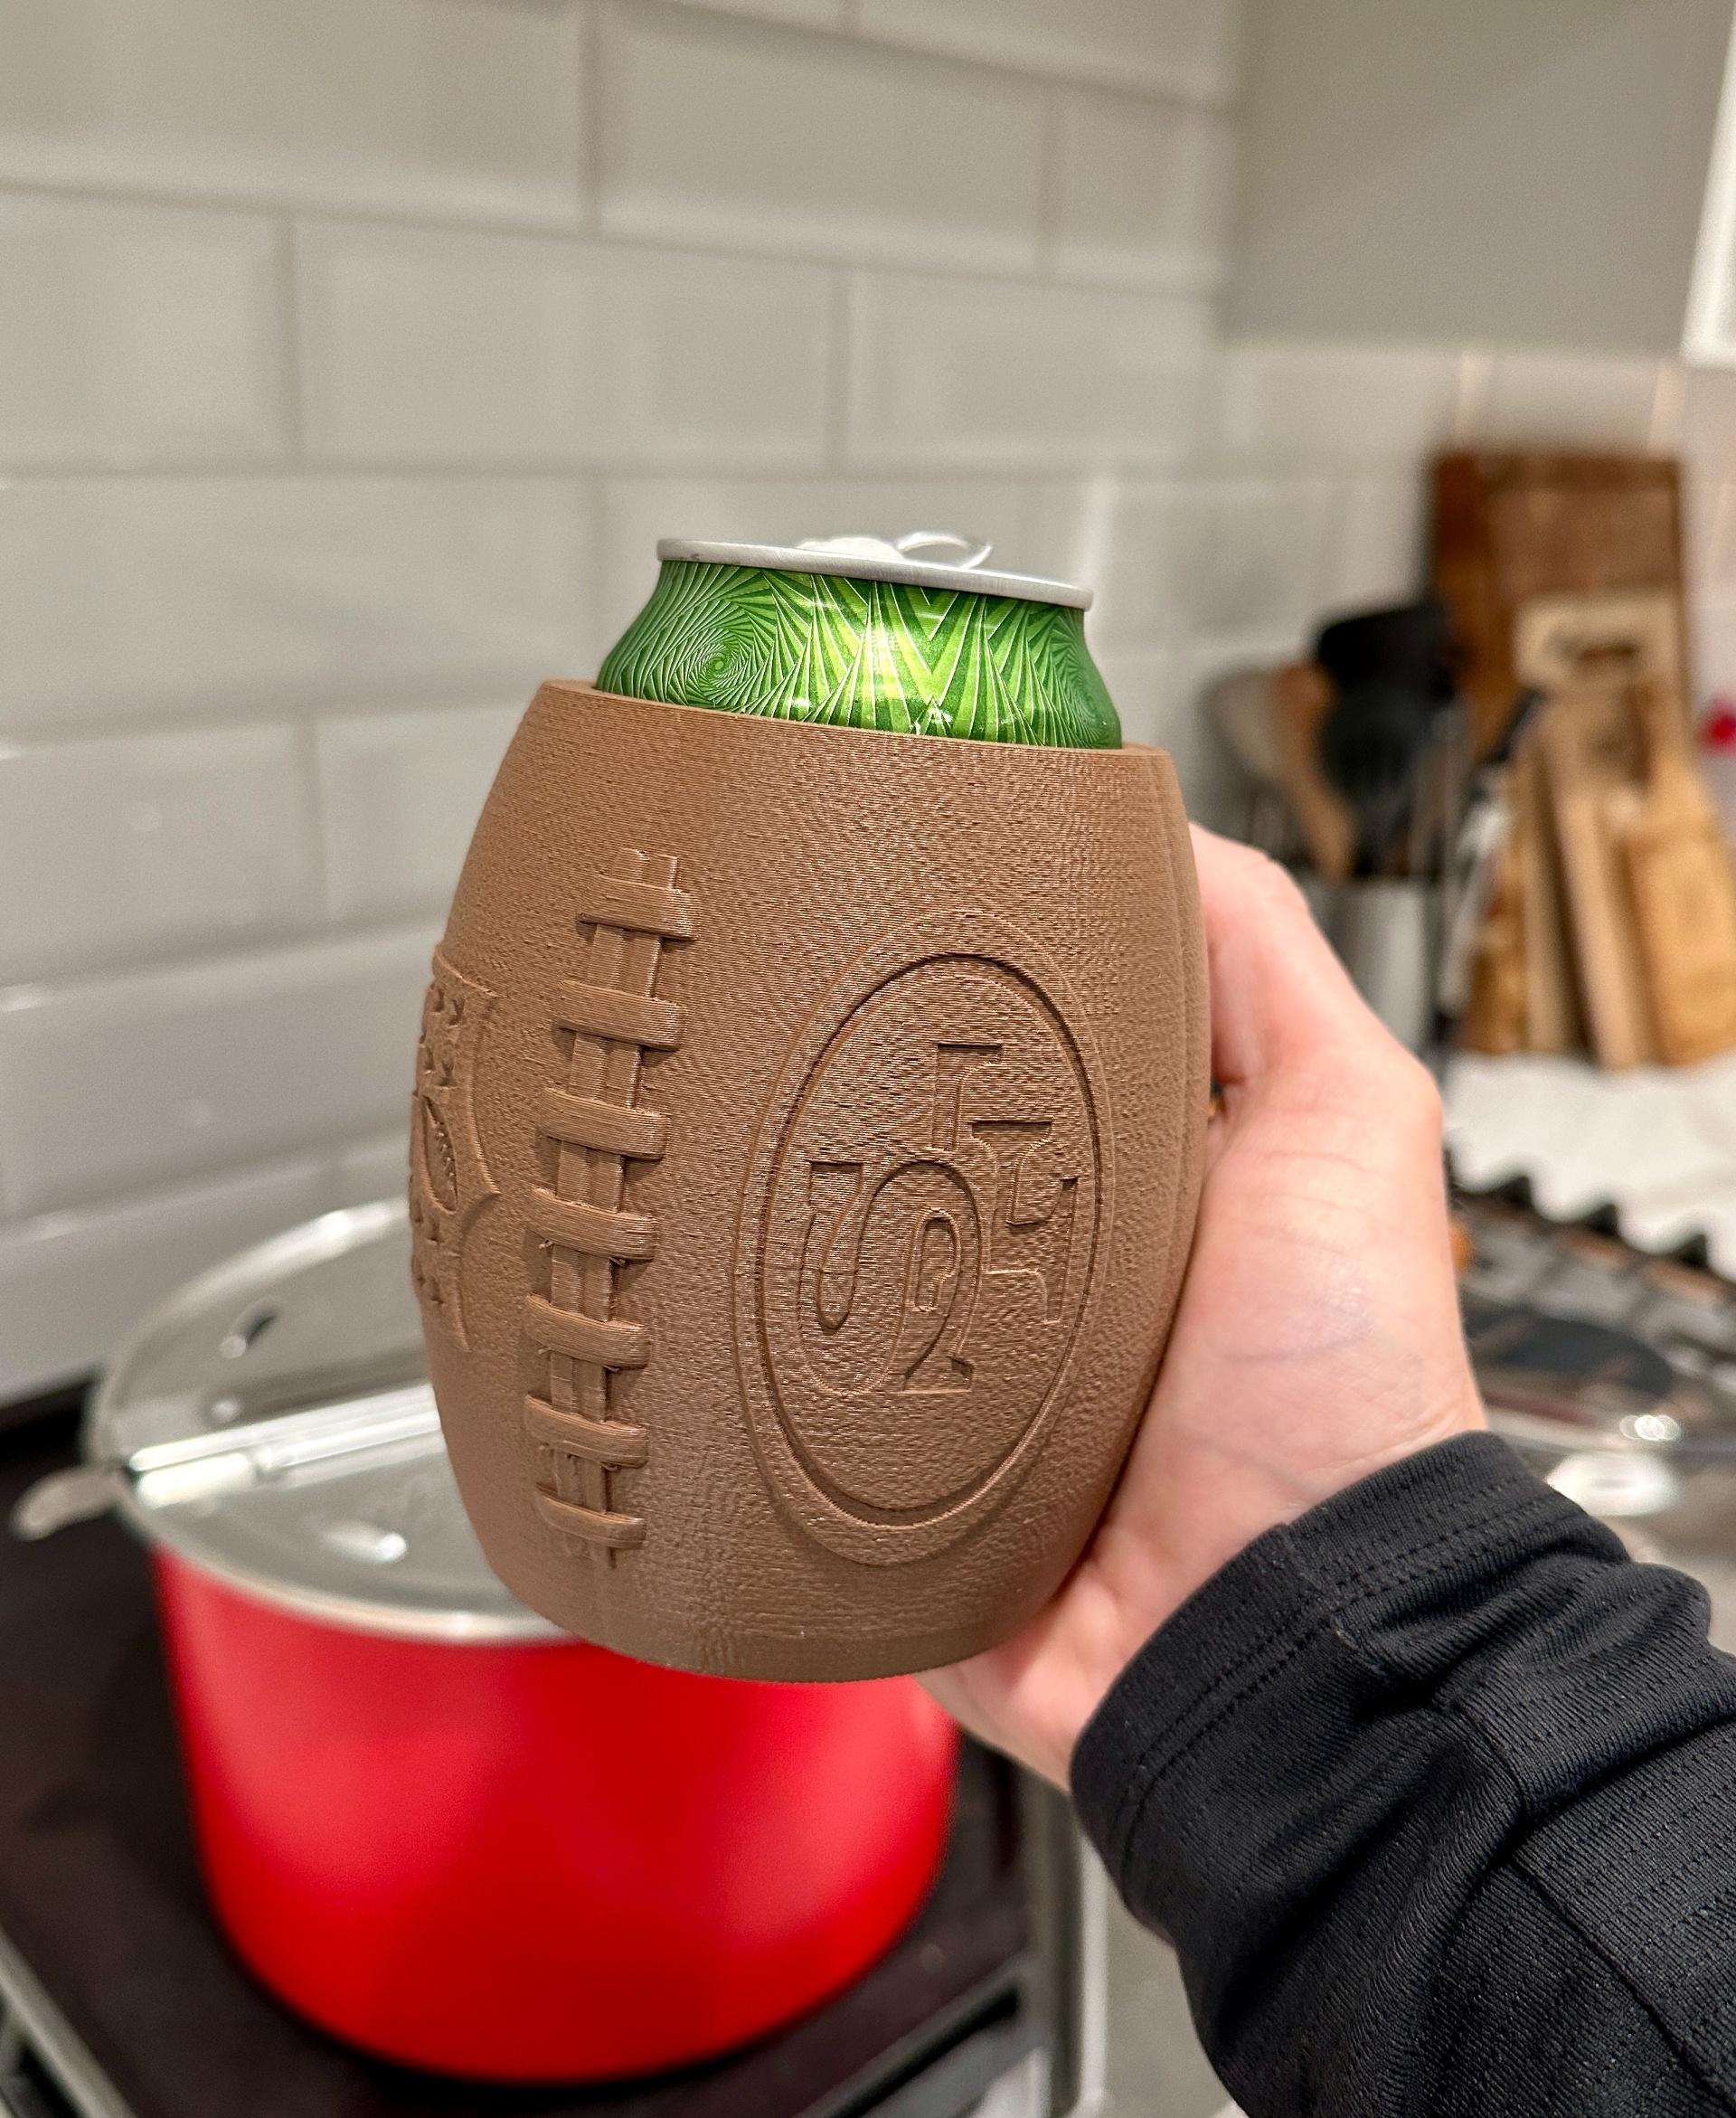 San Francisco 49ers Football Beer Can Holder - Awesome, thank you! - 3d model